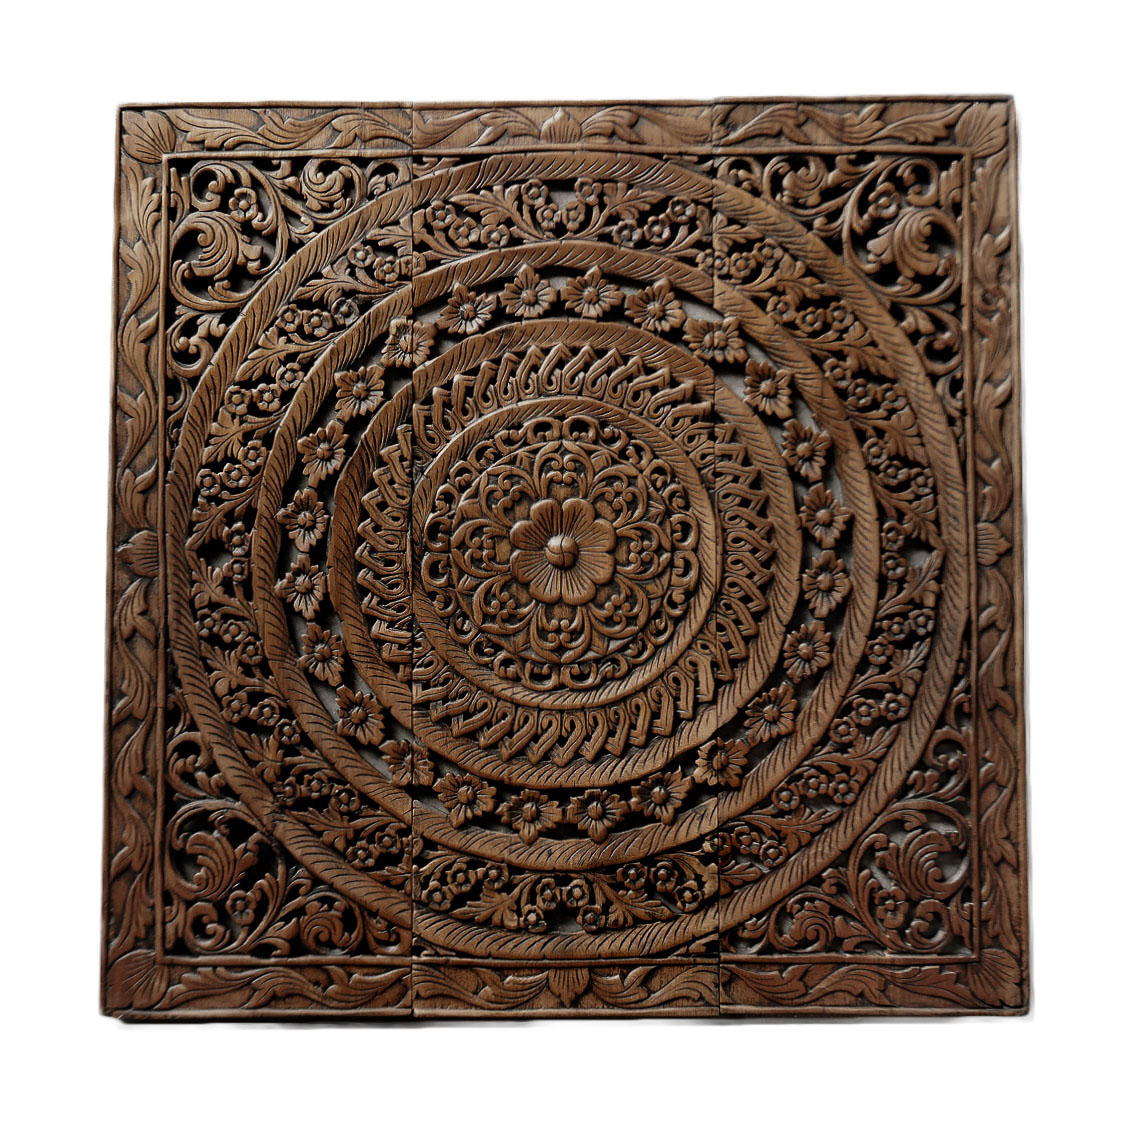 Moroccan Decent Wood Carving Wall Art, Wooden Carved Wall Art